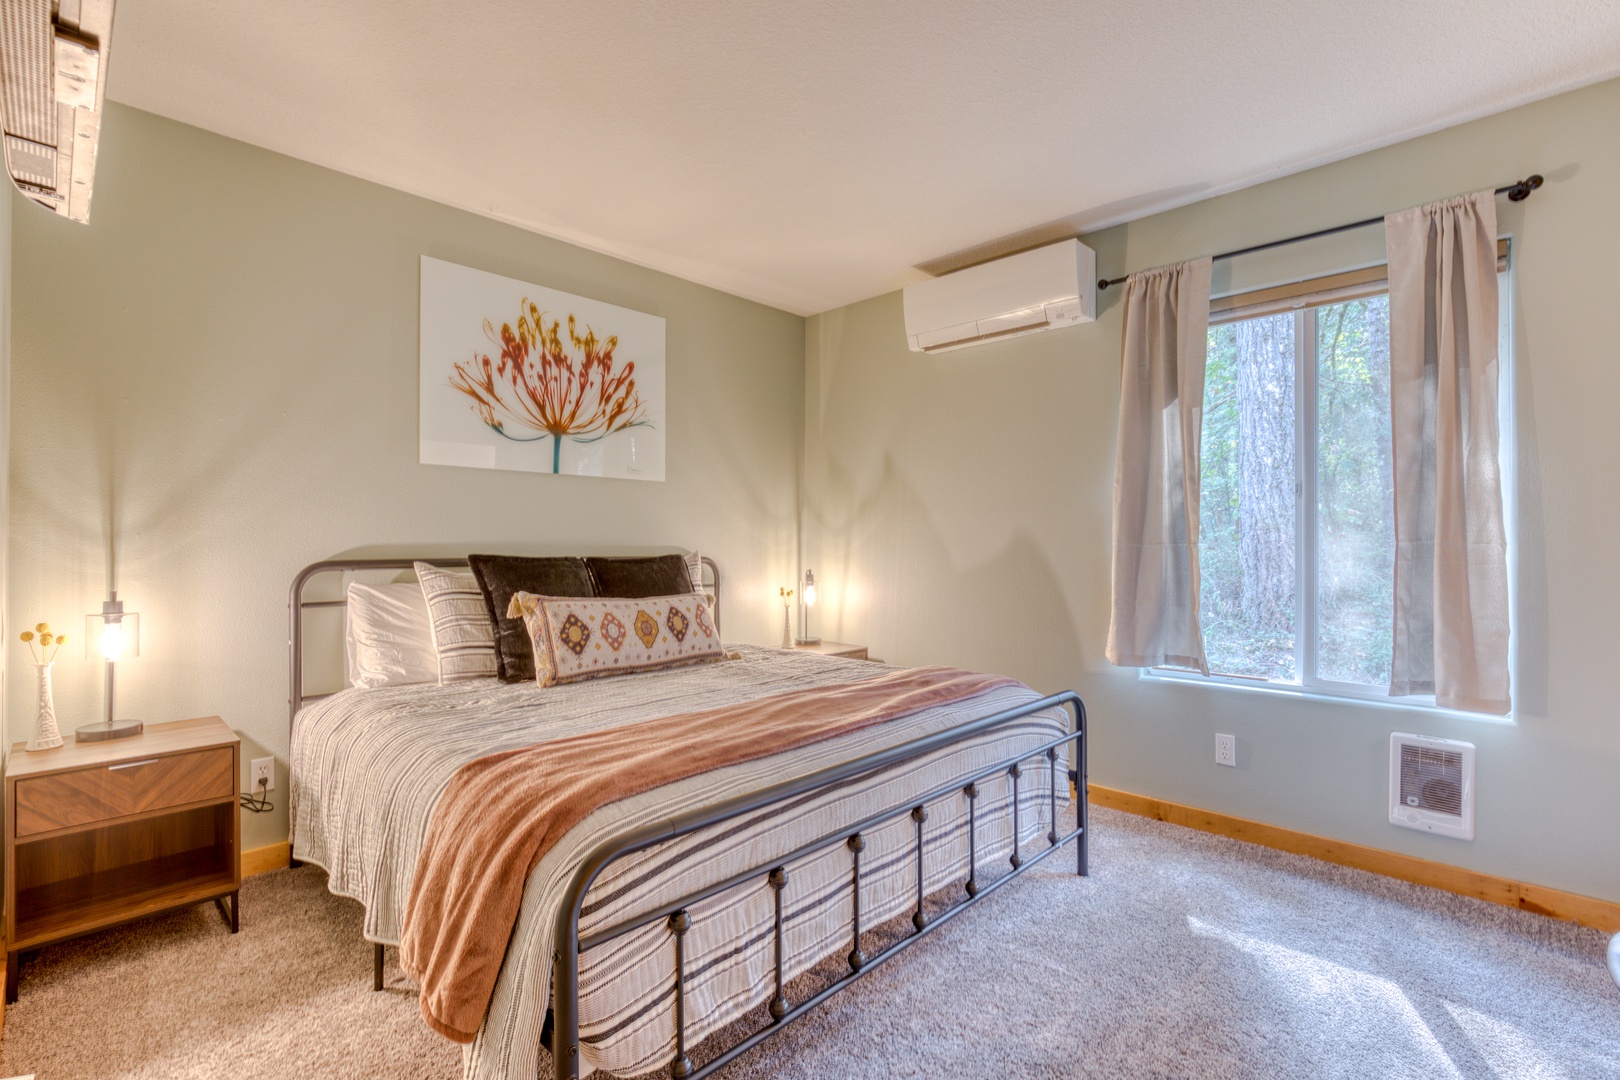 Brightwood Vacation Rentals, Riverside Retreat - The Master Bedroom will be on your right down the hallway